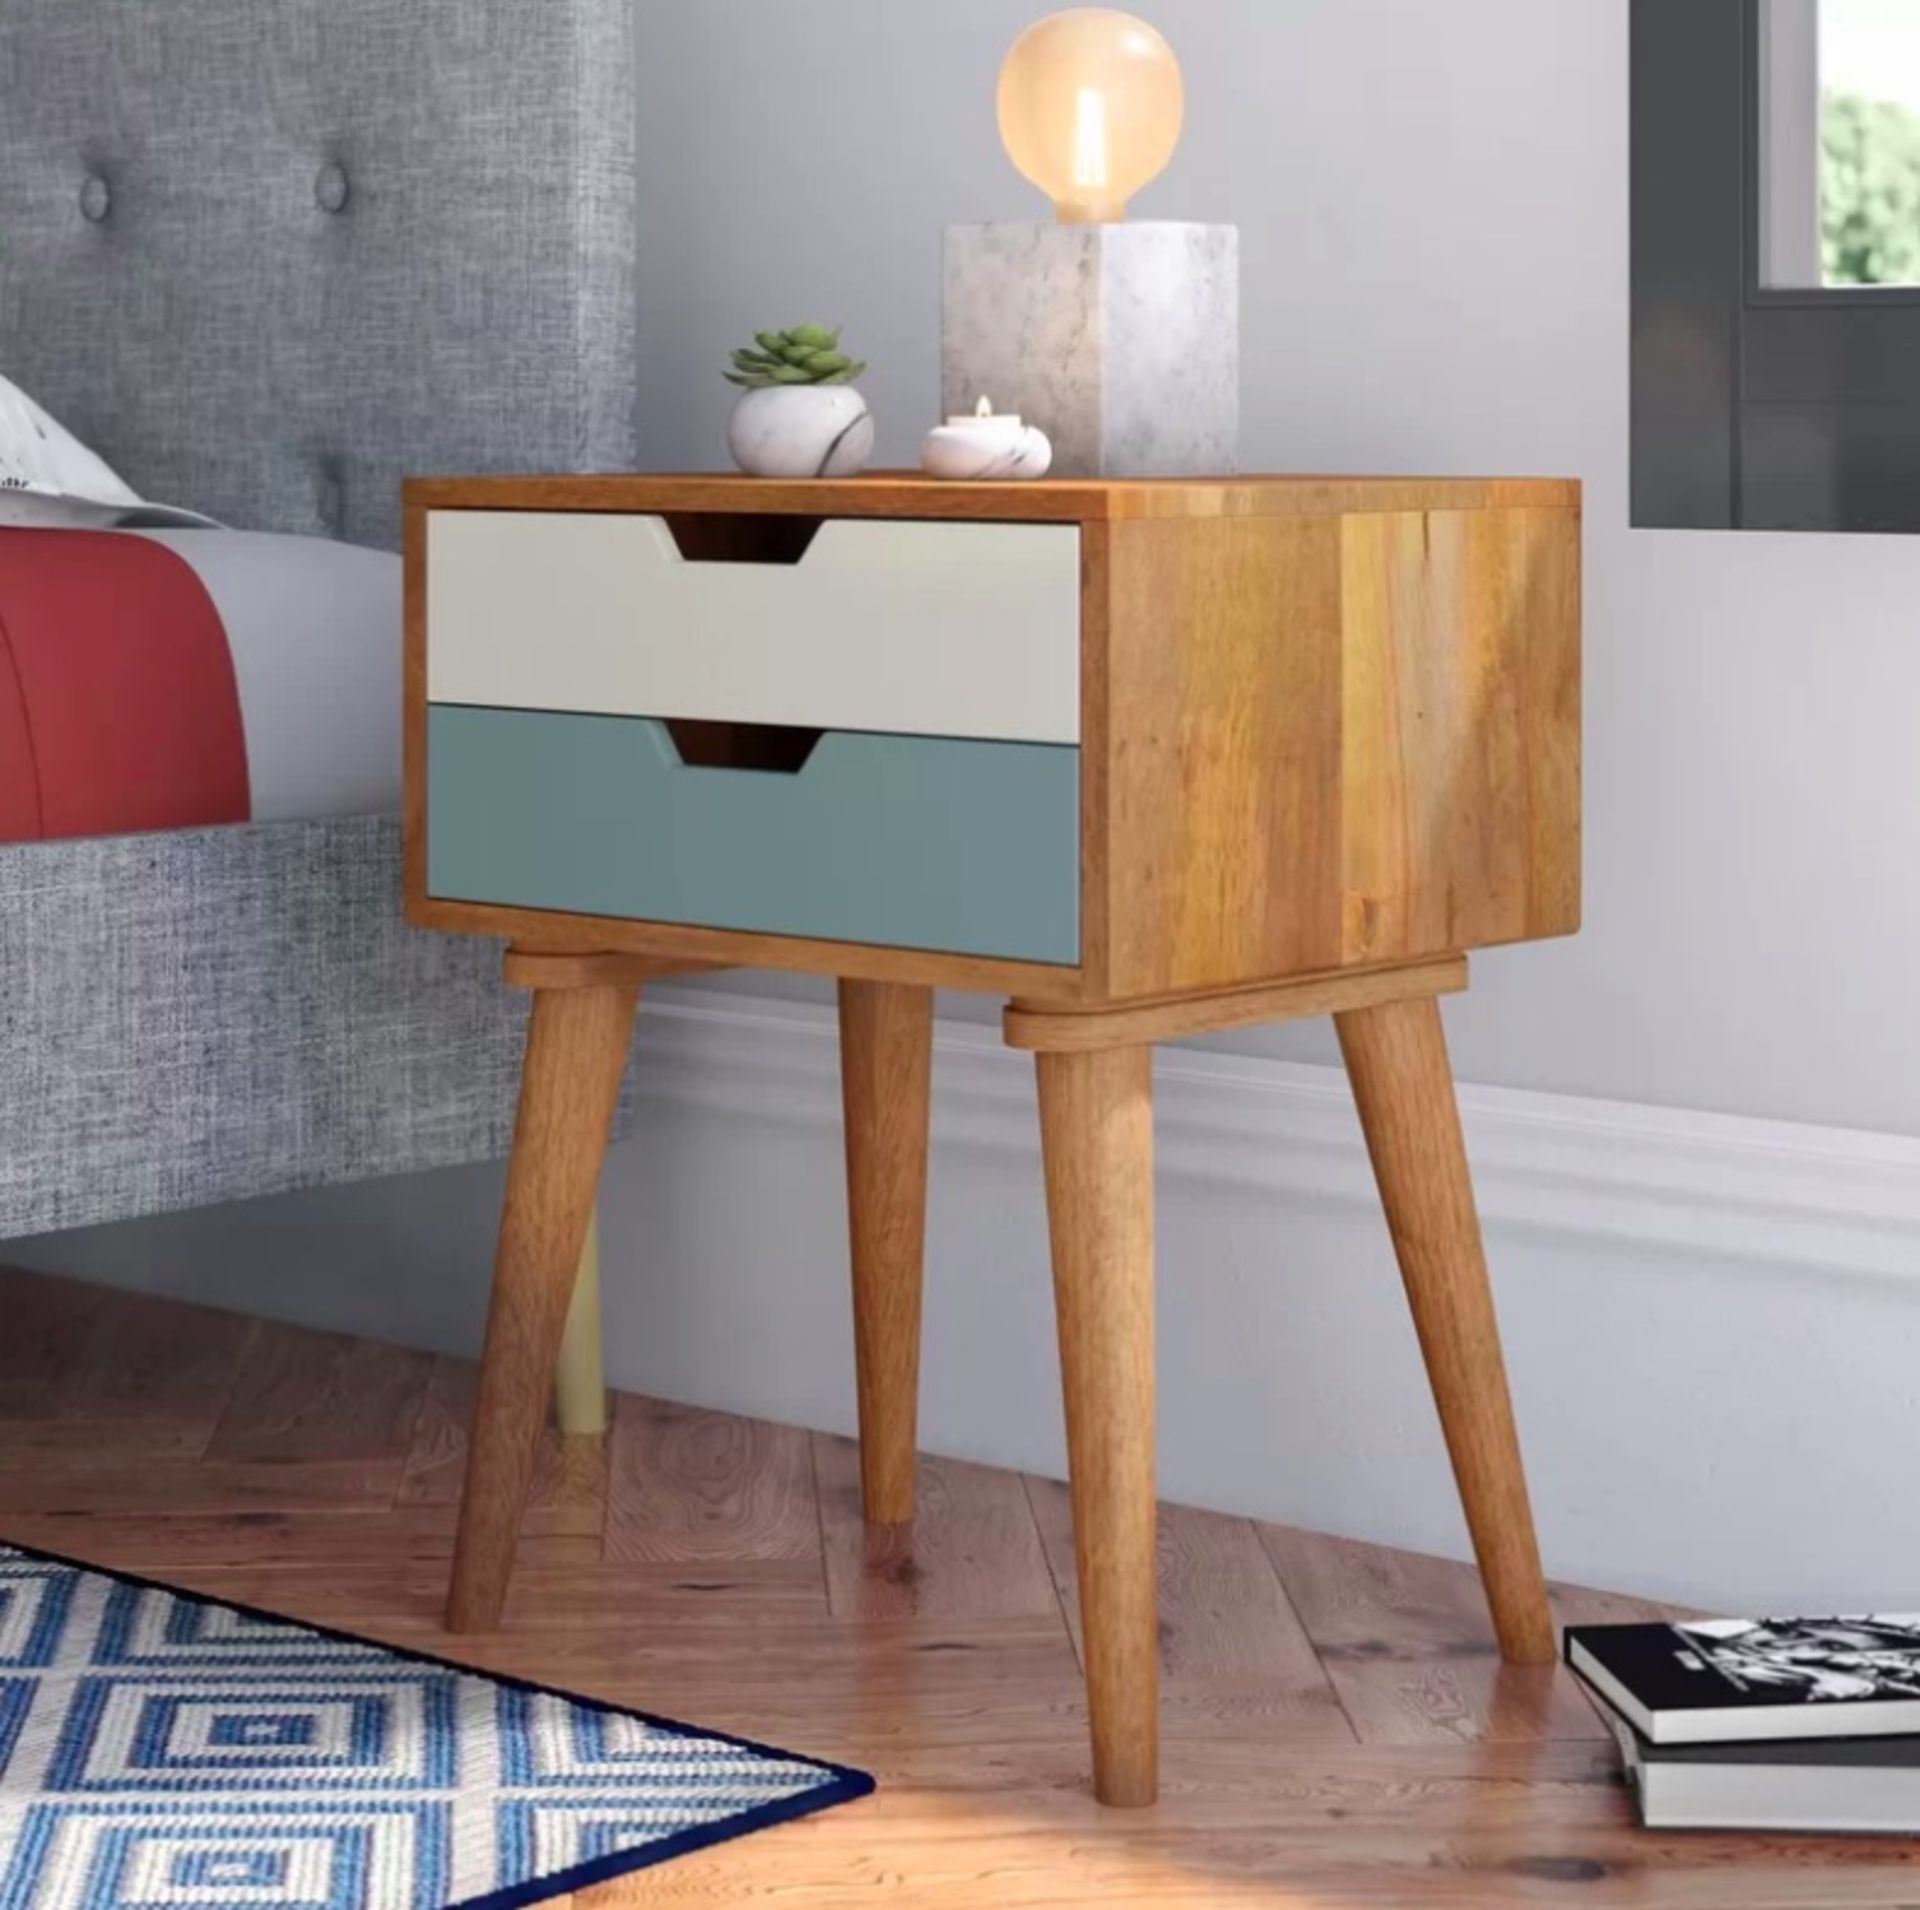 Nordic 2 Drawer Bedside Table This Solid Wood Nordic Style 2 Drawer Bedside Table Is A Fabulous